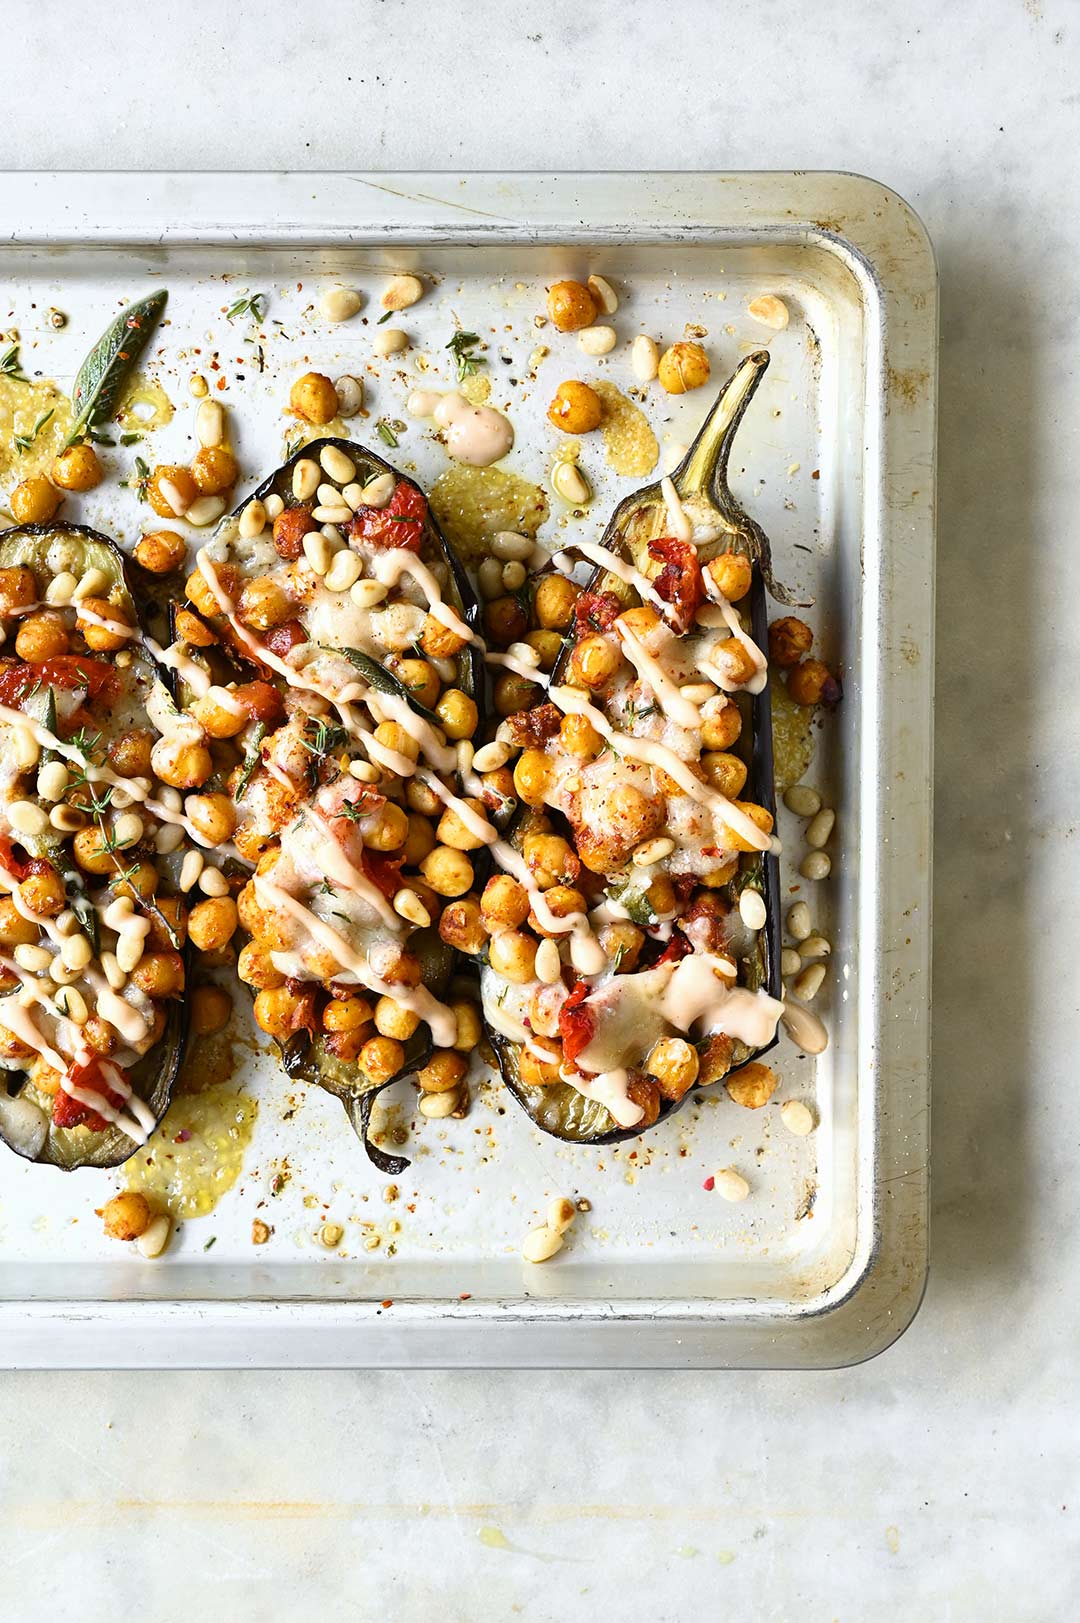 serving dumplings | Roasted eggplant with smokey chickpeas and parmesan